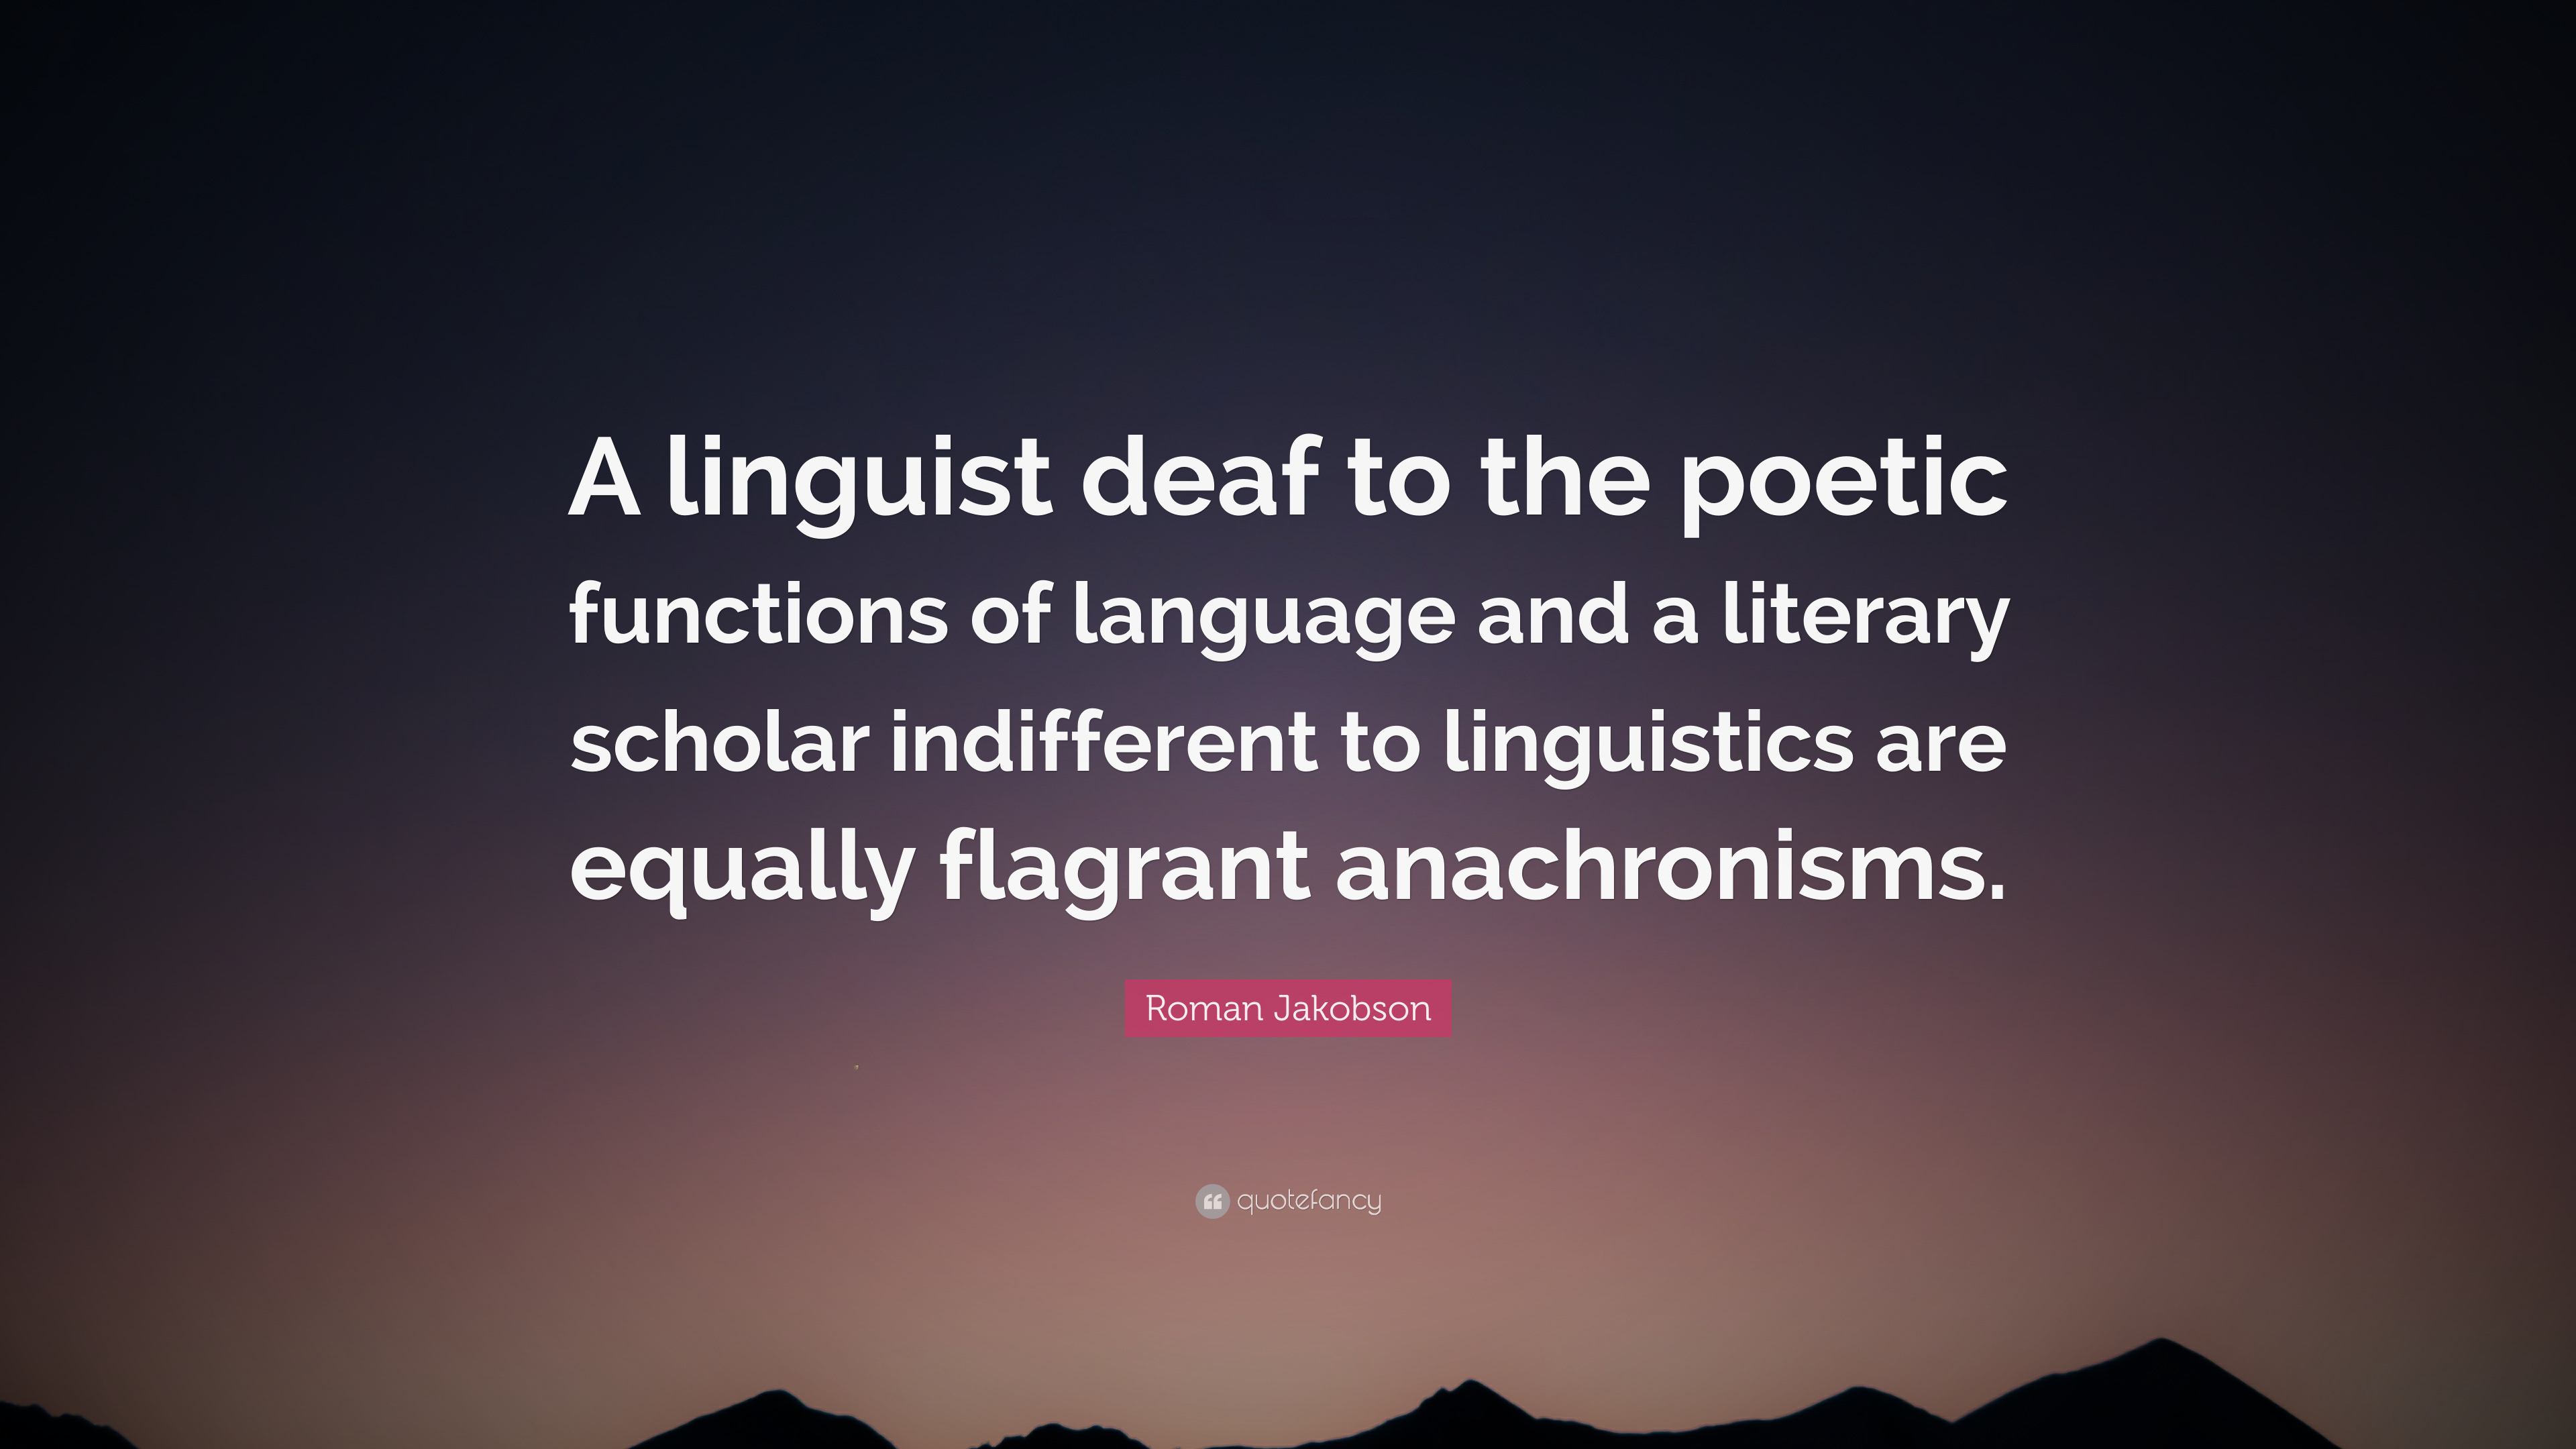 Roman Jakobson Quote: “A linguist deaf to the poetic functions of language and a literary scholar indifferent to linguistics are equally flagra.”